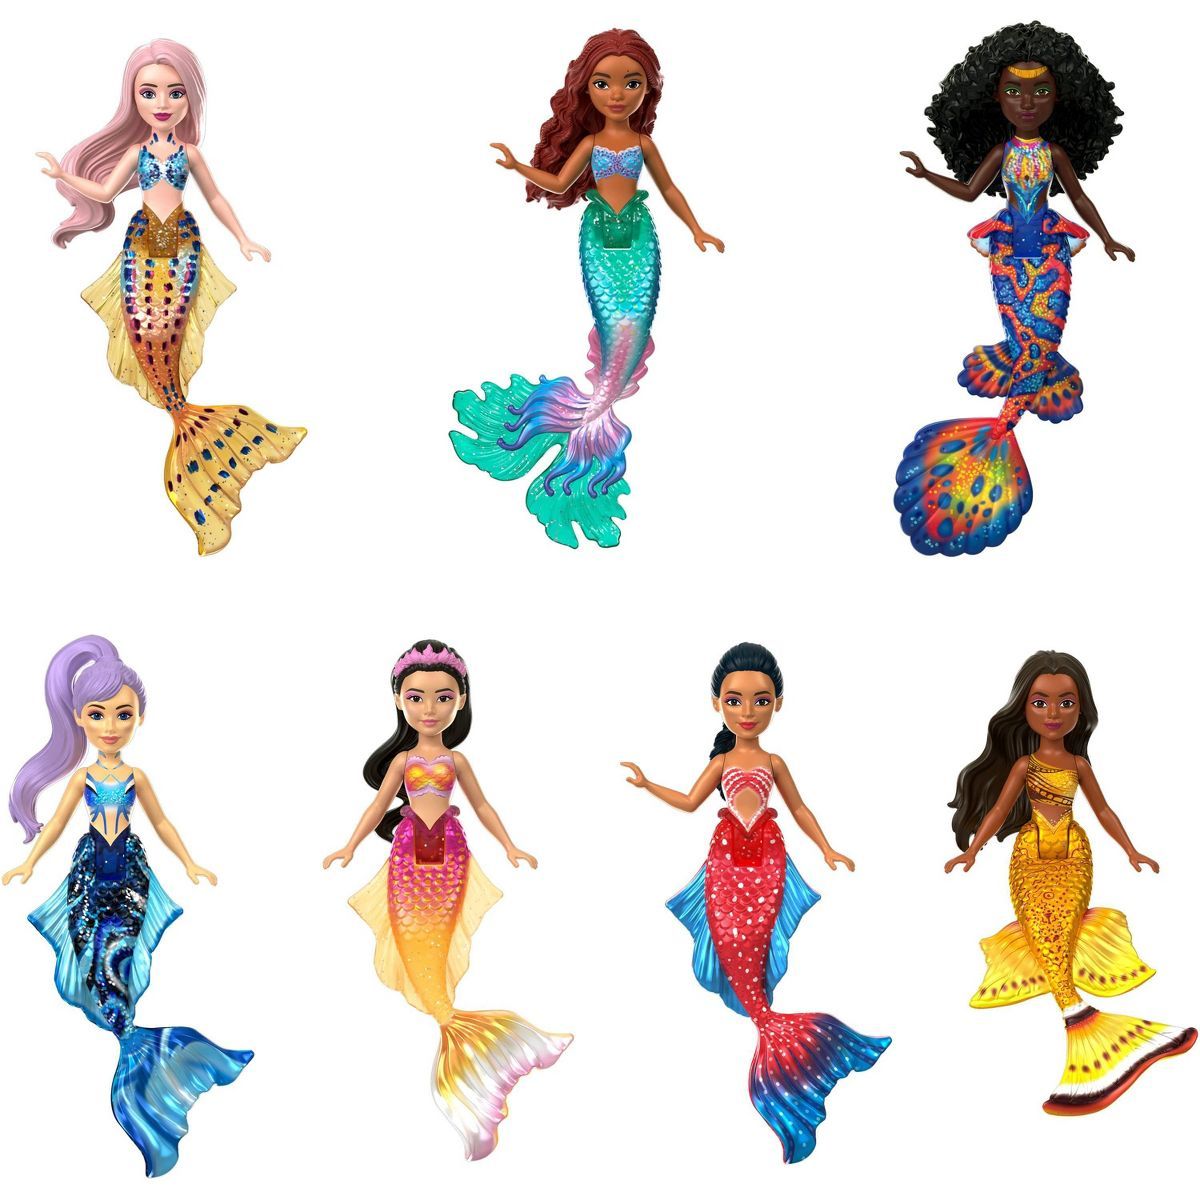 Disney The Little Mermaid Ariel and Sisters Small Doll Set with 7 Mermaid Dolls | Target